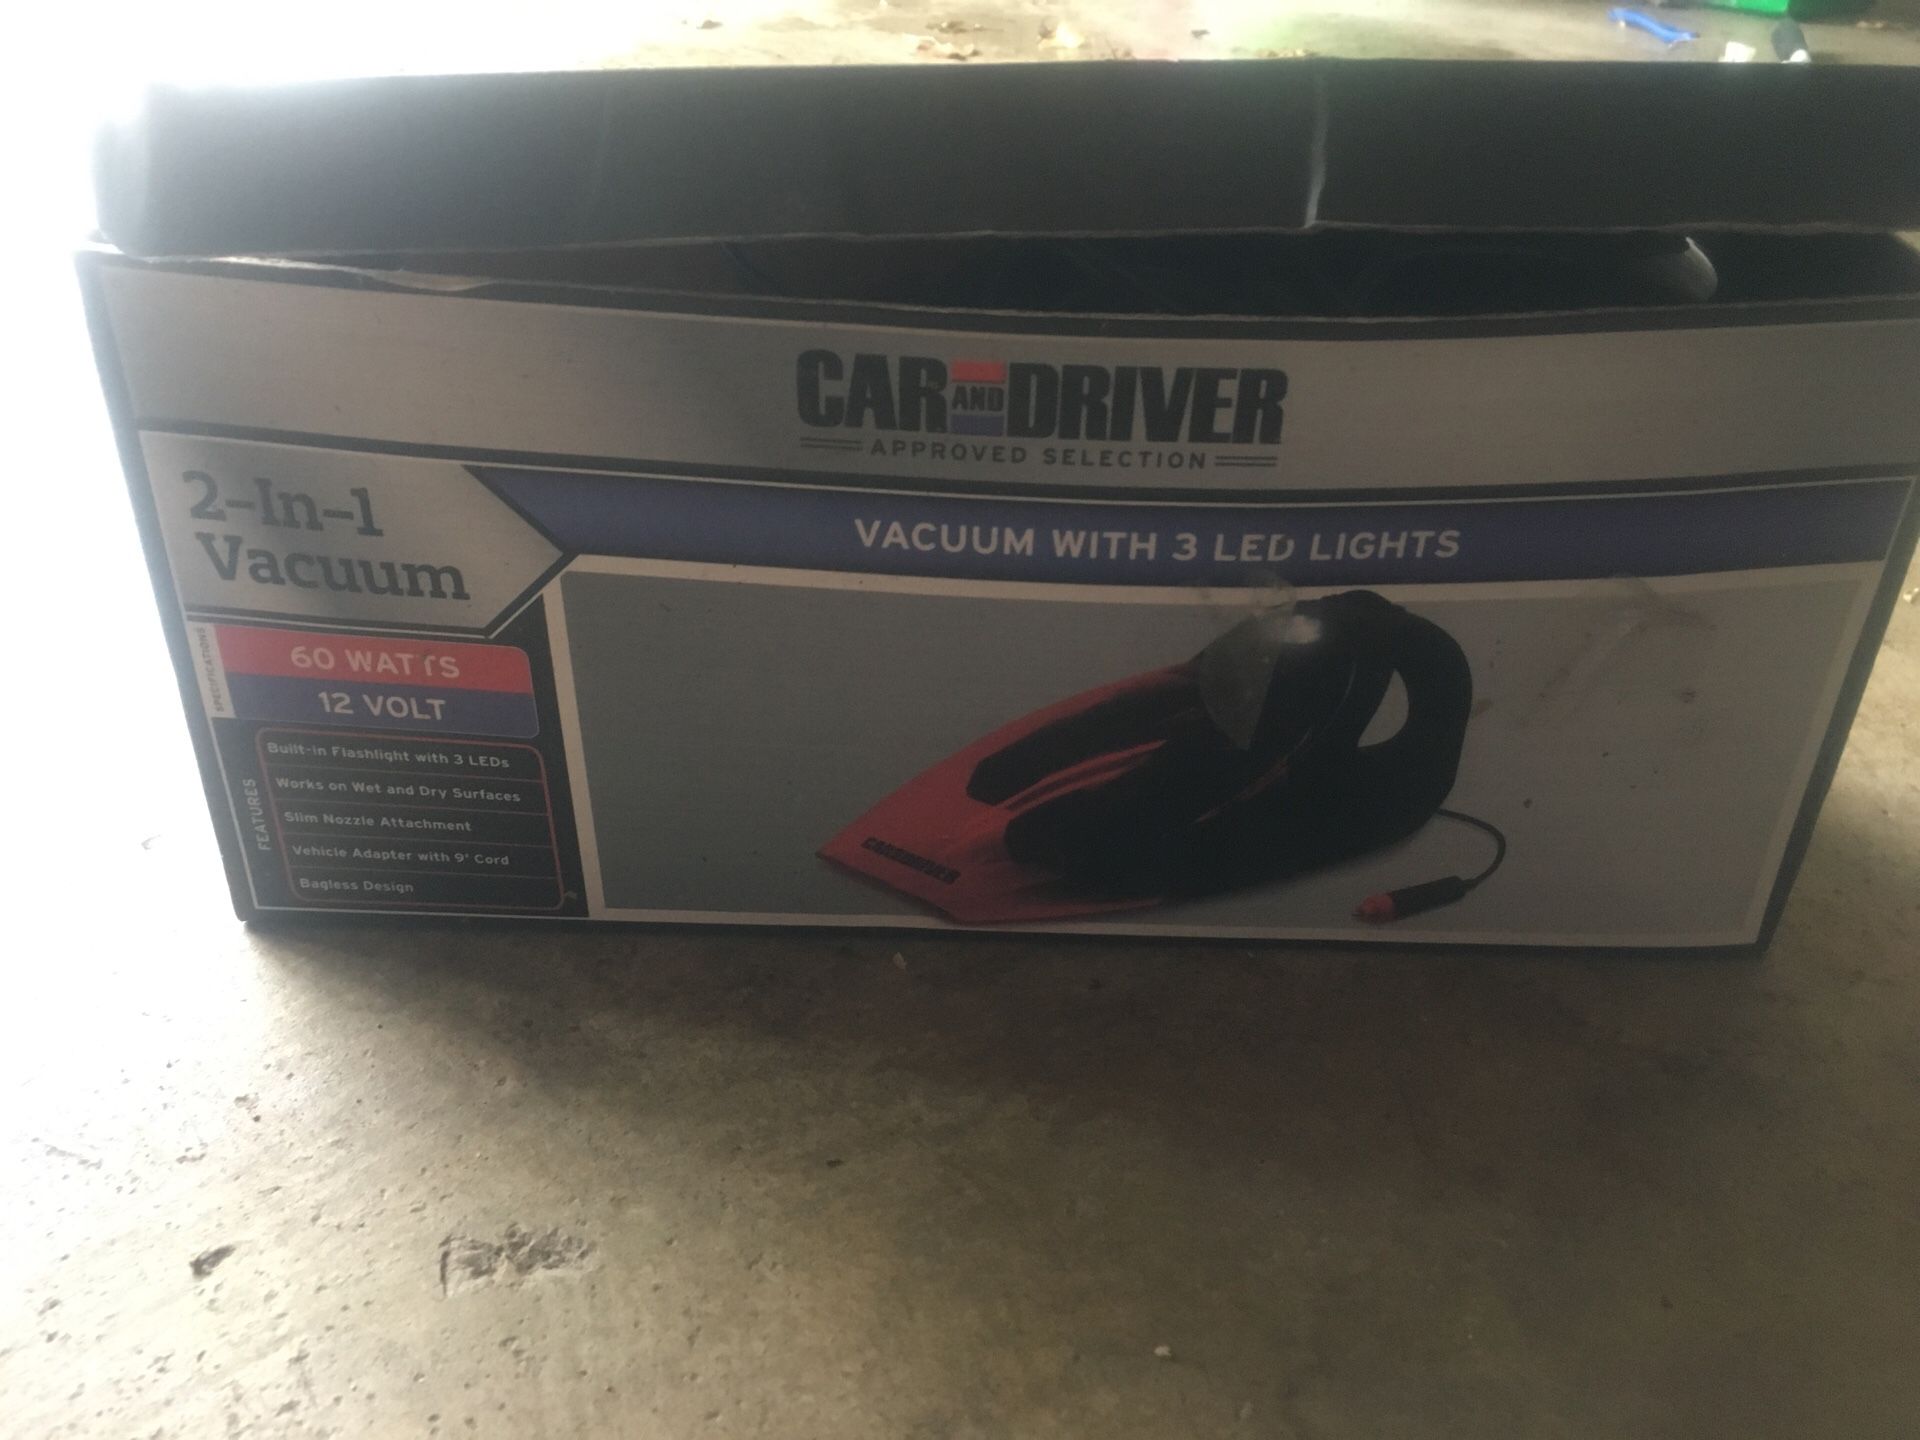 Car vacuum with 3 LED lights